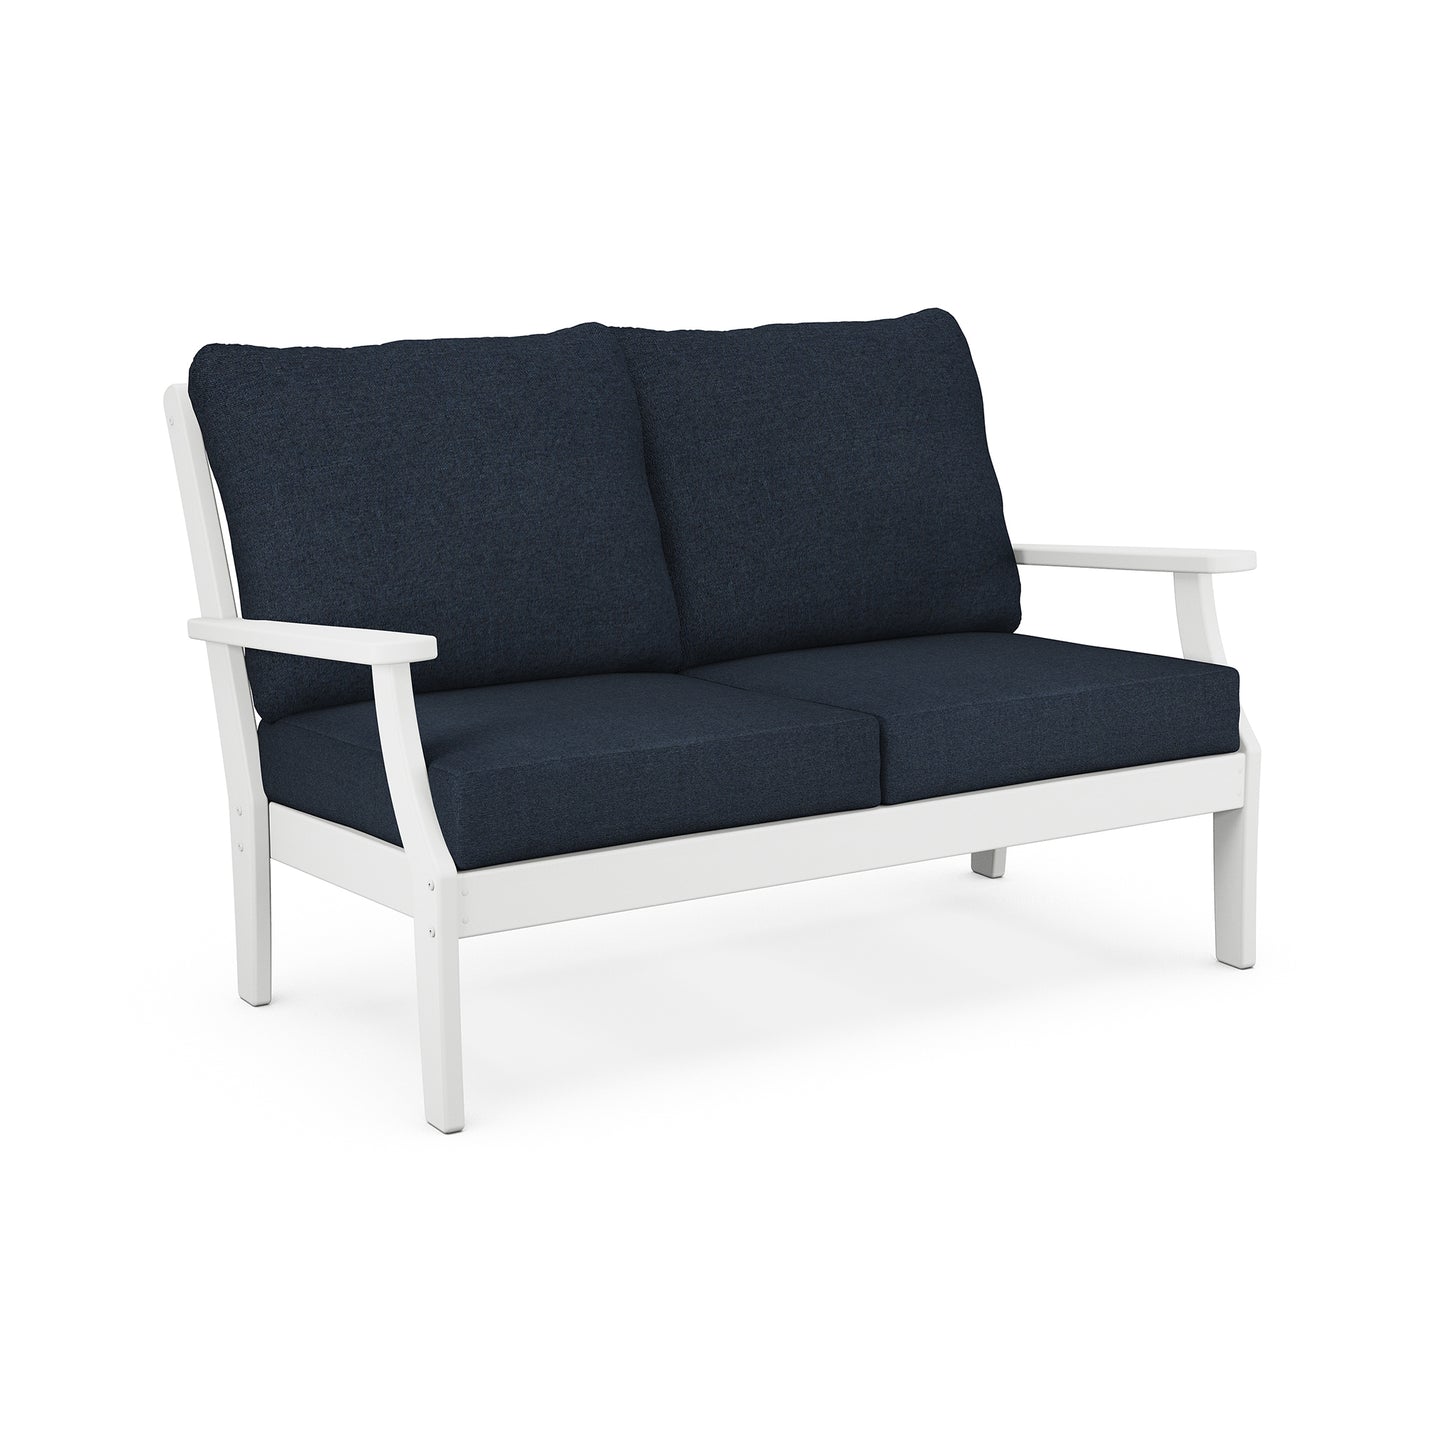 A modern two-seater POLYWOOD Braxton Deep Seating Settee with a white frame and deep blue cushions, isolated on a white background. Made from recycled plastic lumber, the design is simple and sleek, suitable for contemporary interior decor.